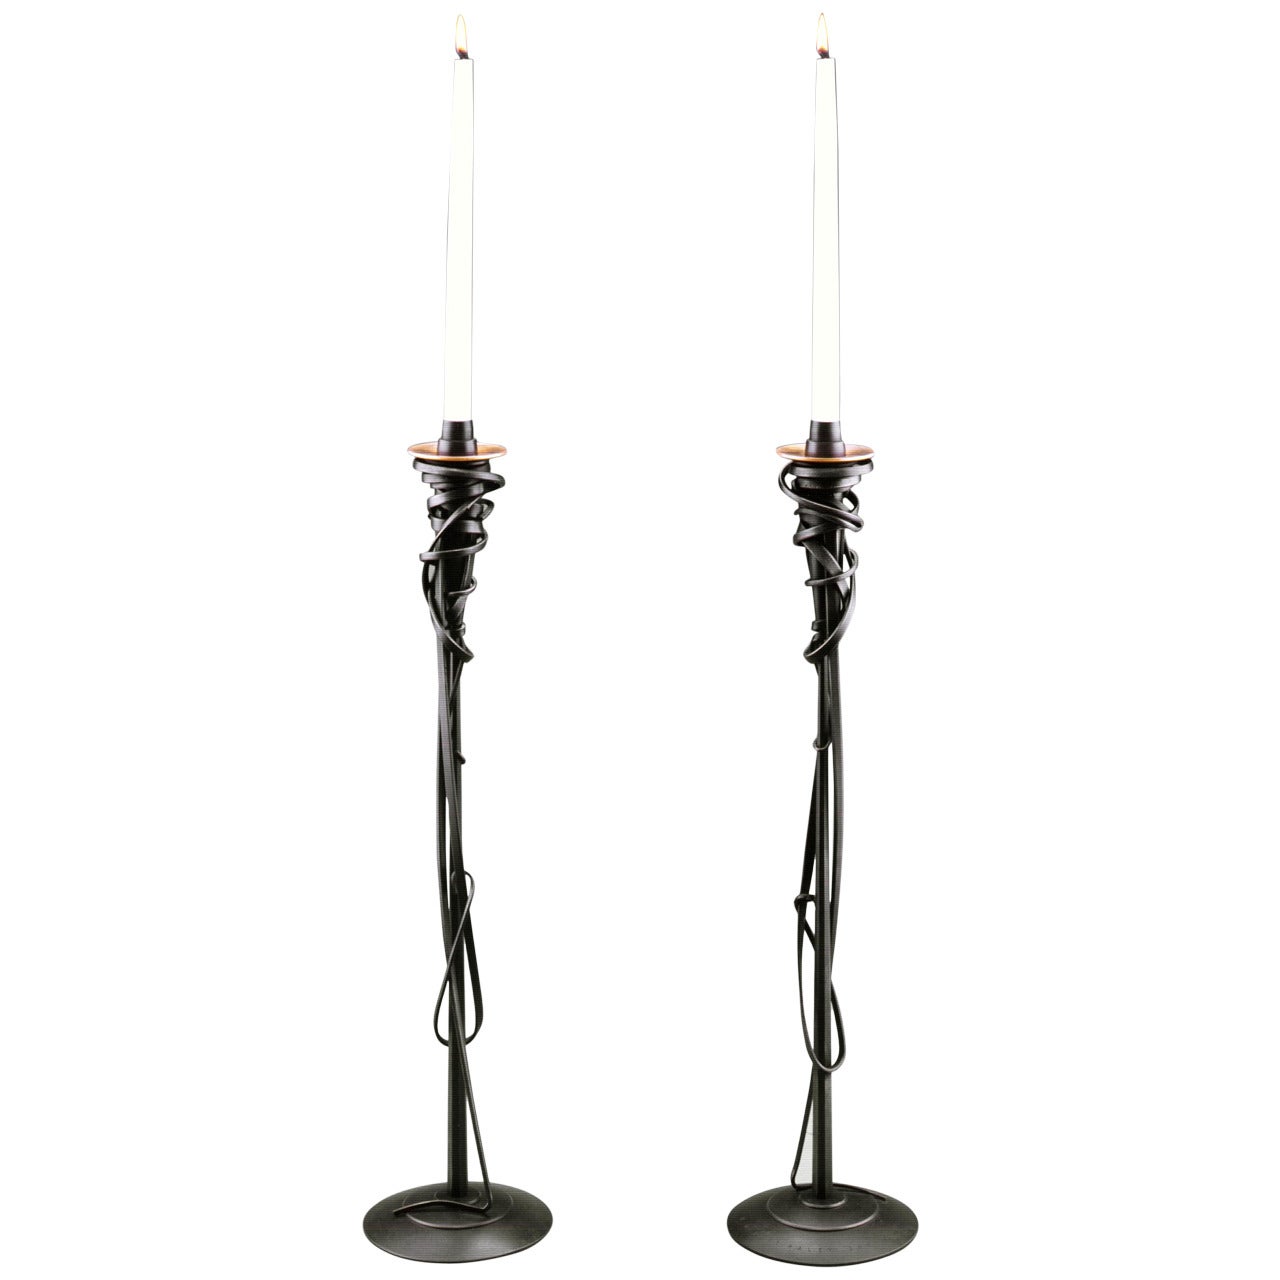 Pair of Albert Paley "Tall Candleholders", Blackened Metal and Brass, 2001